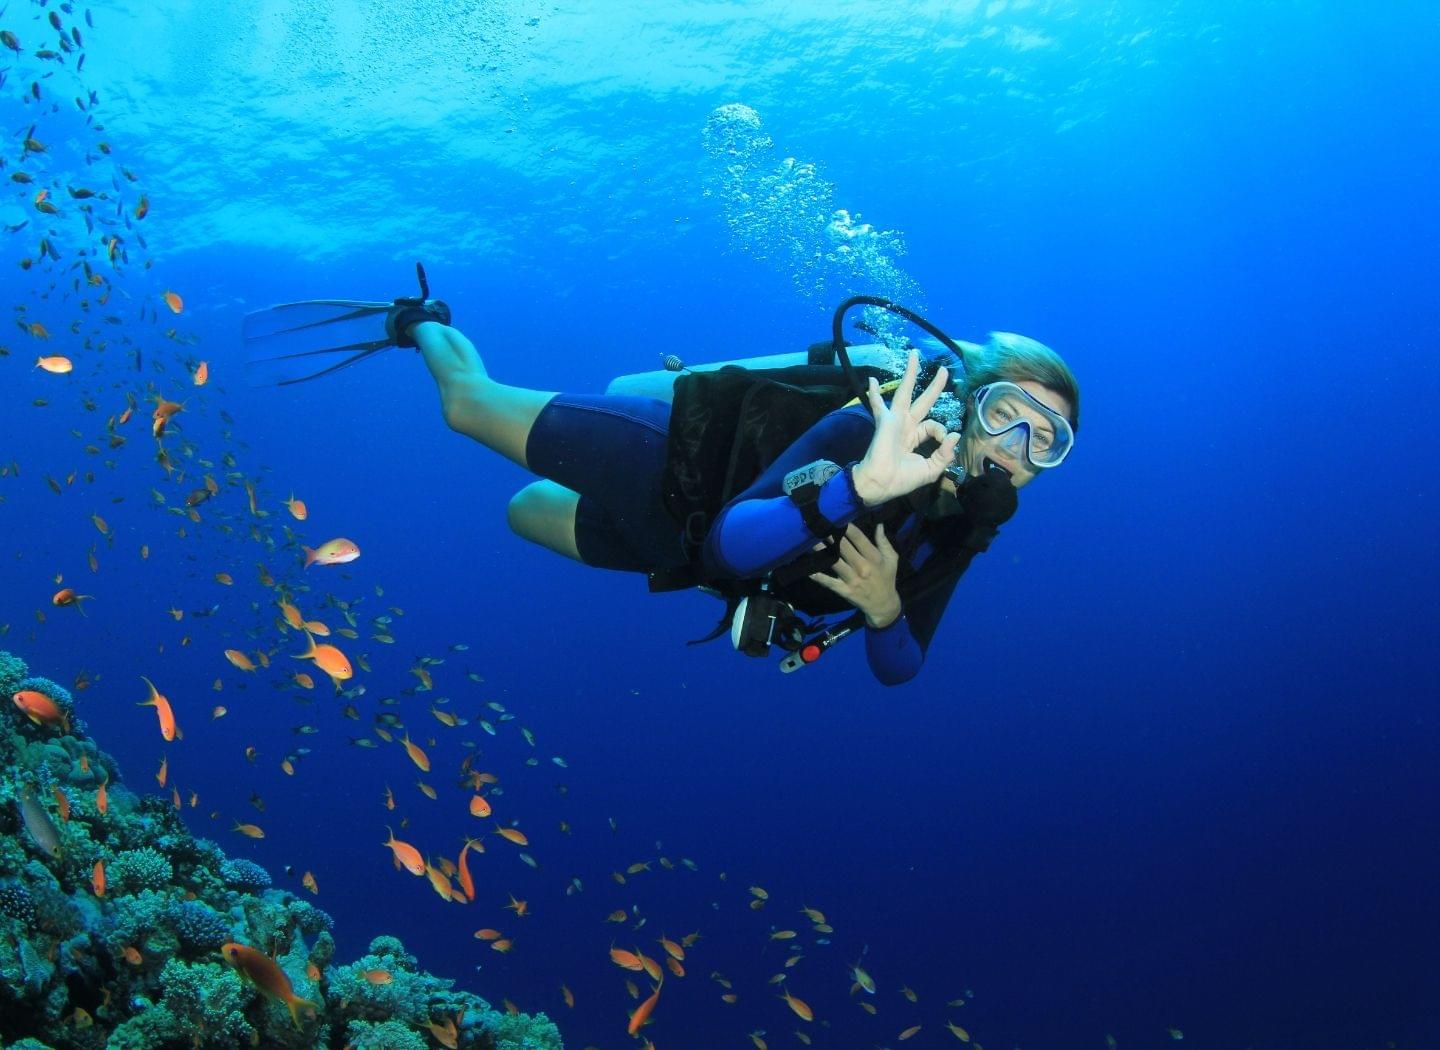 Snorkeling vs. scuba diving: How are they different?